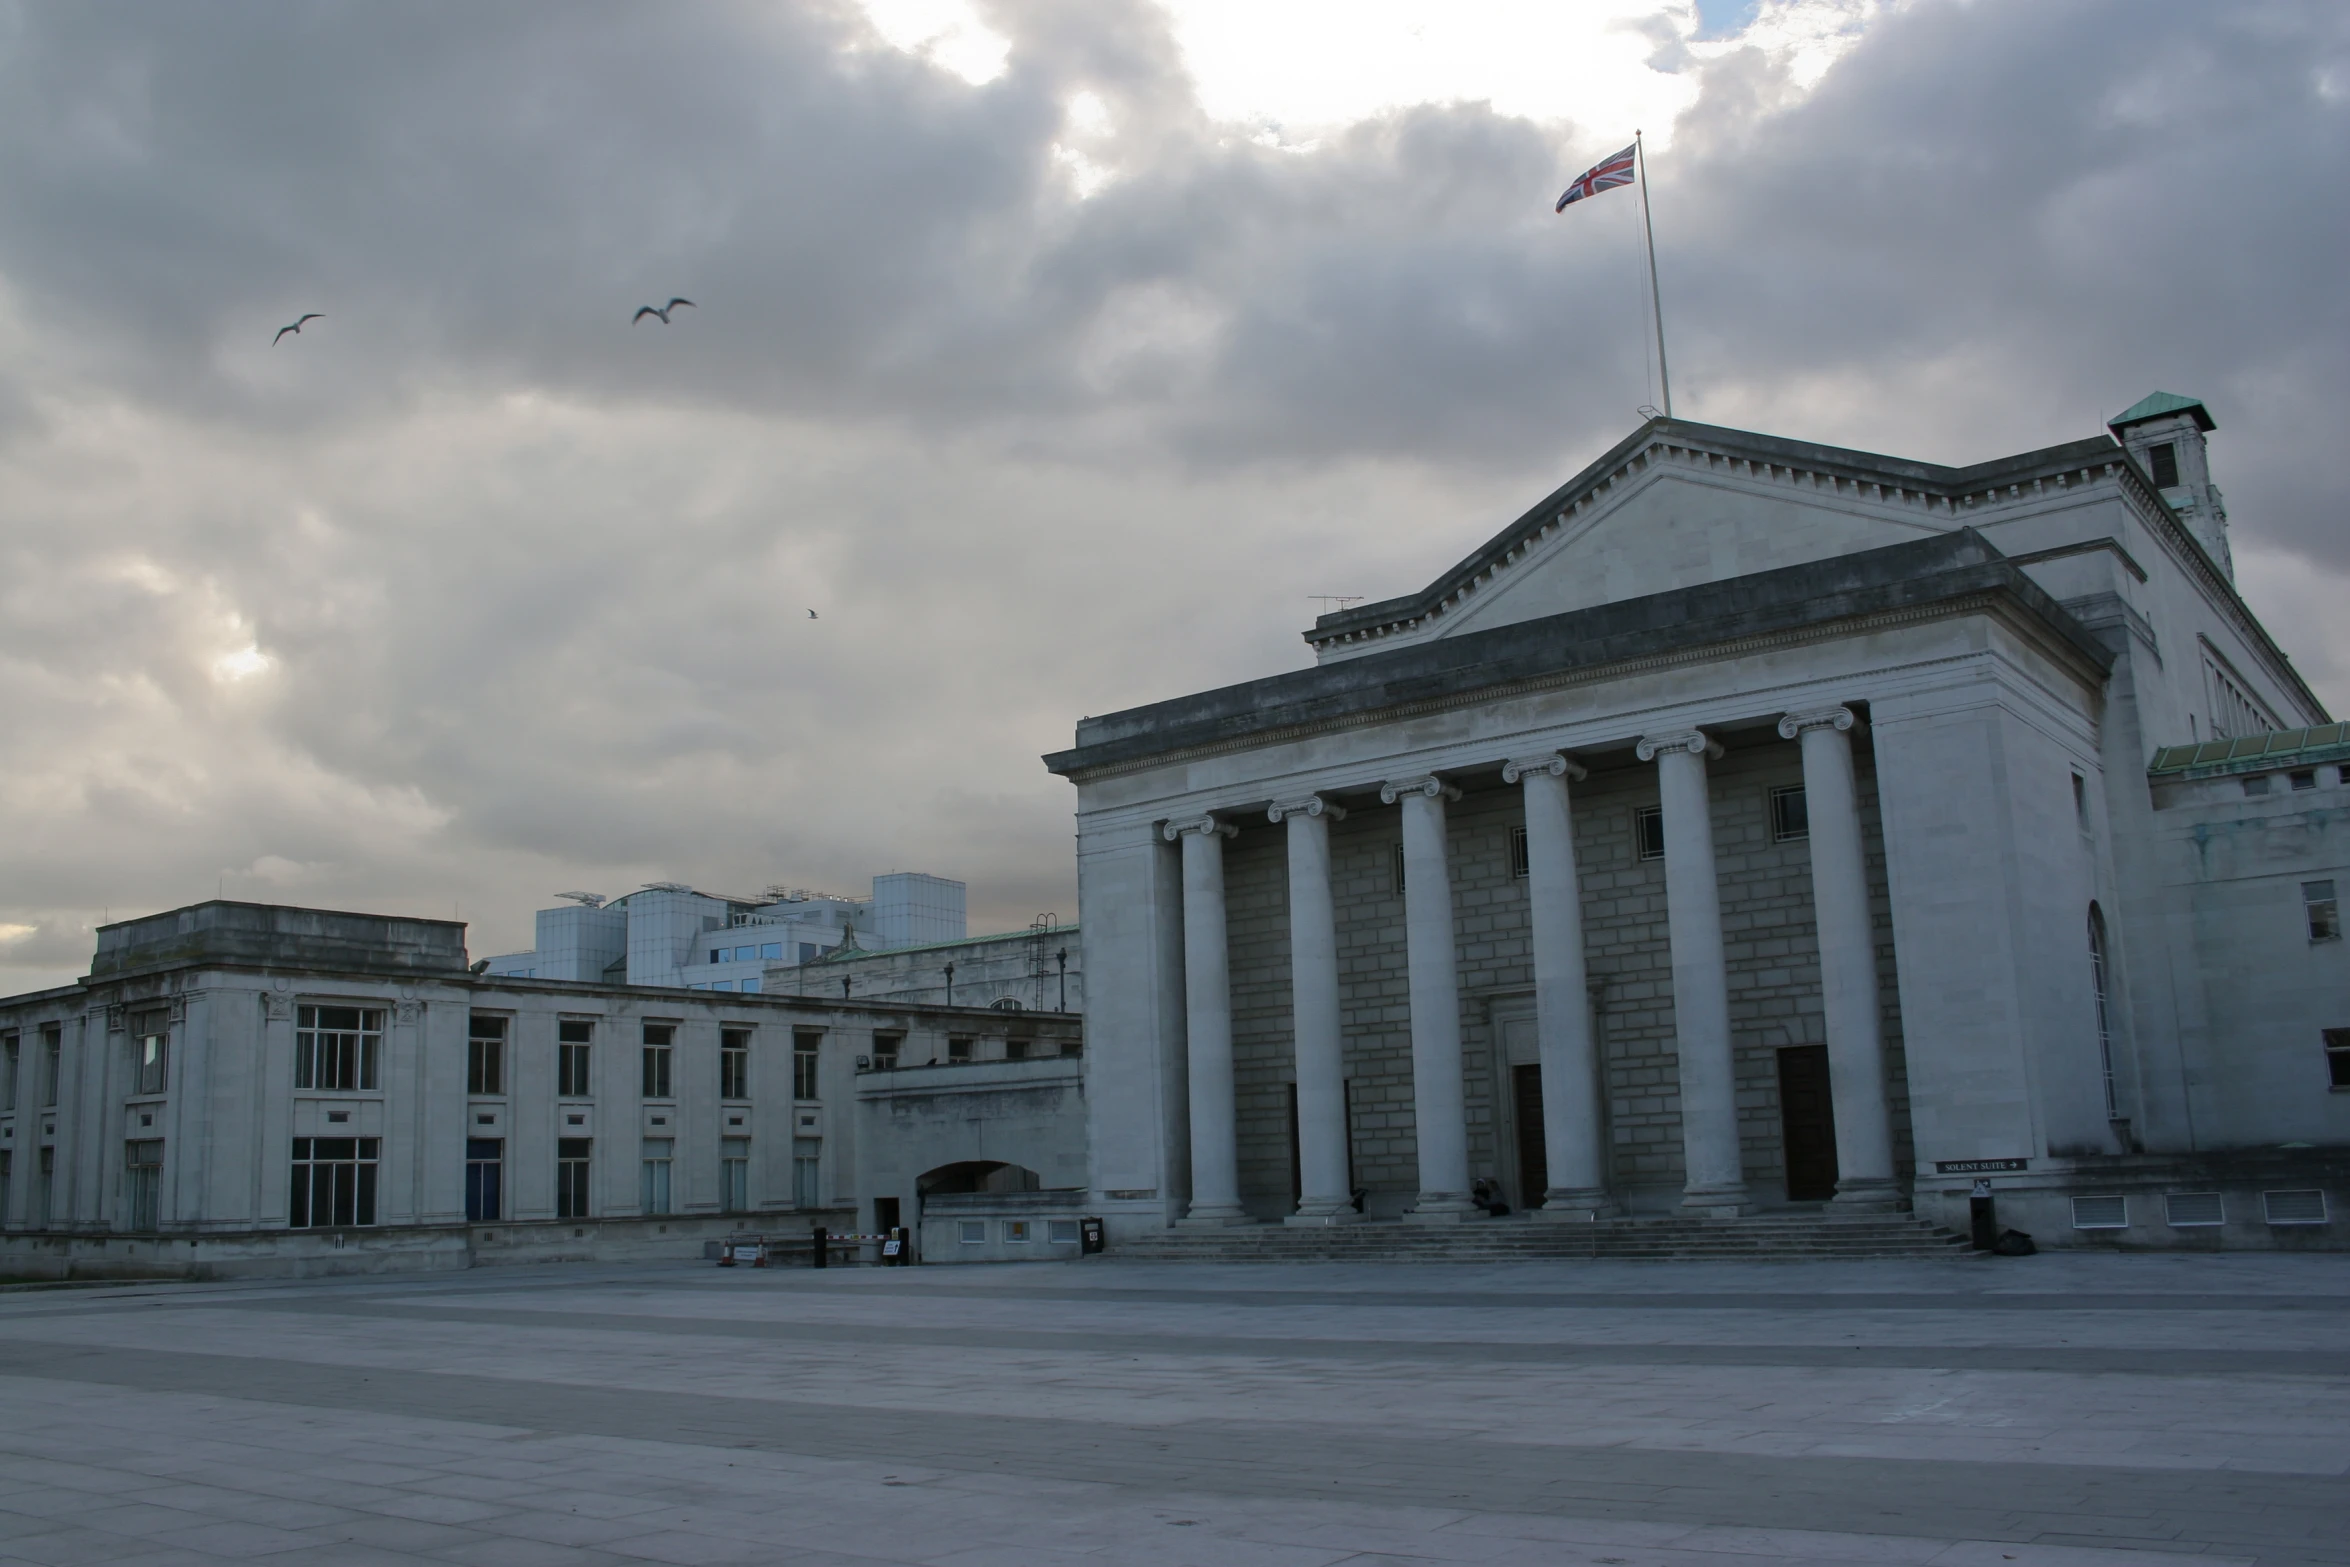 a large building with columns and a flag flying from the top